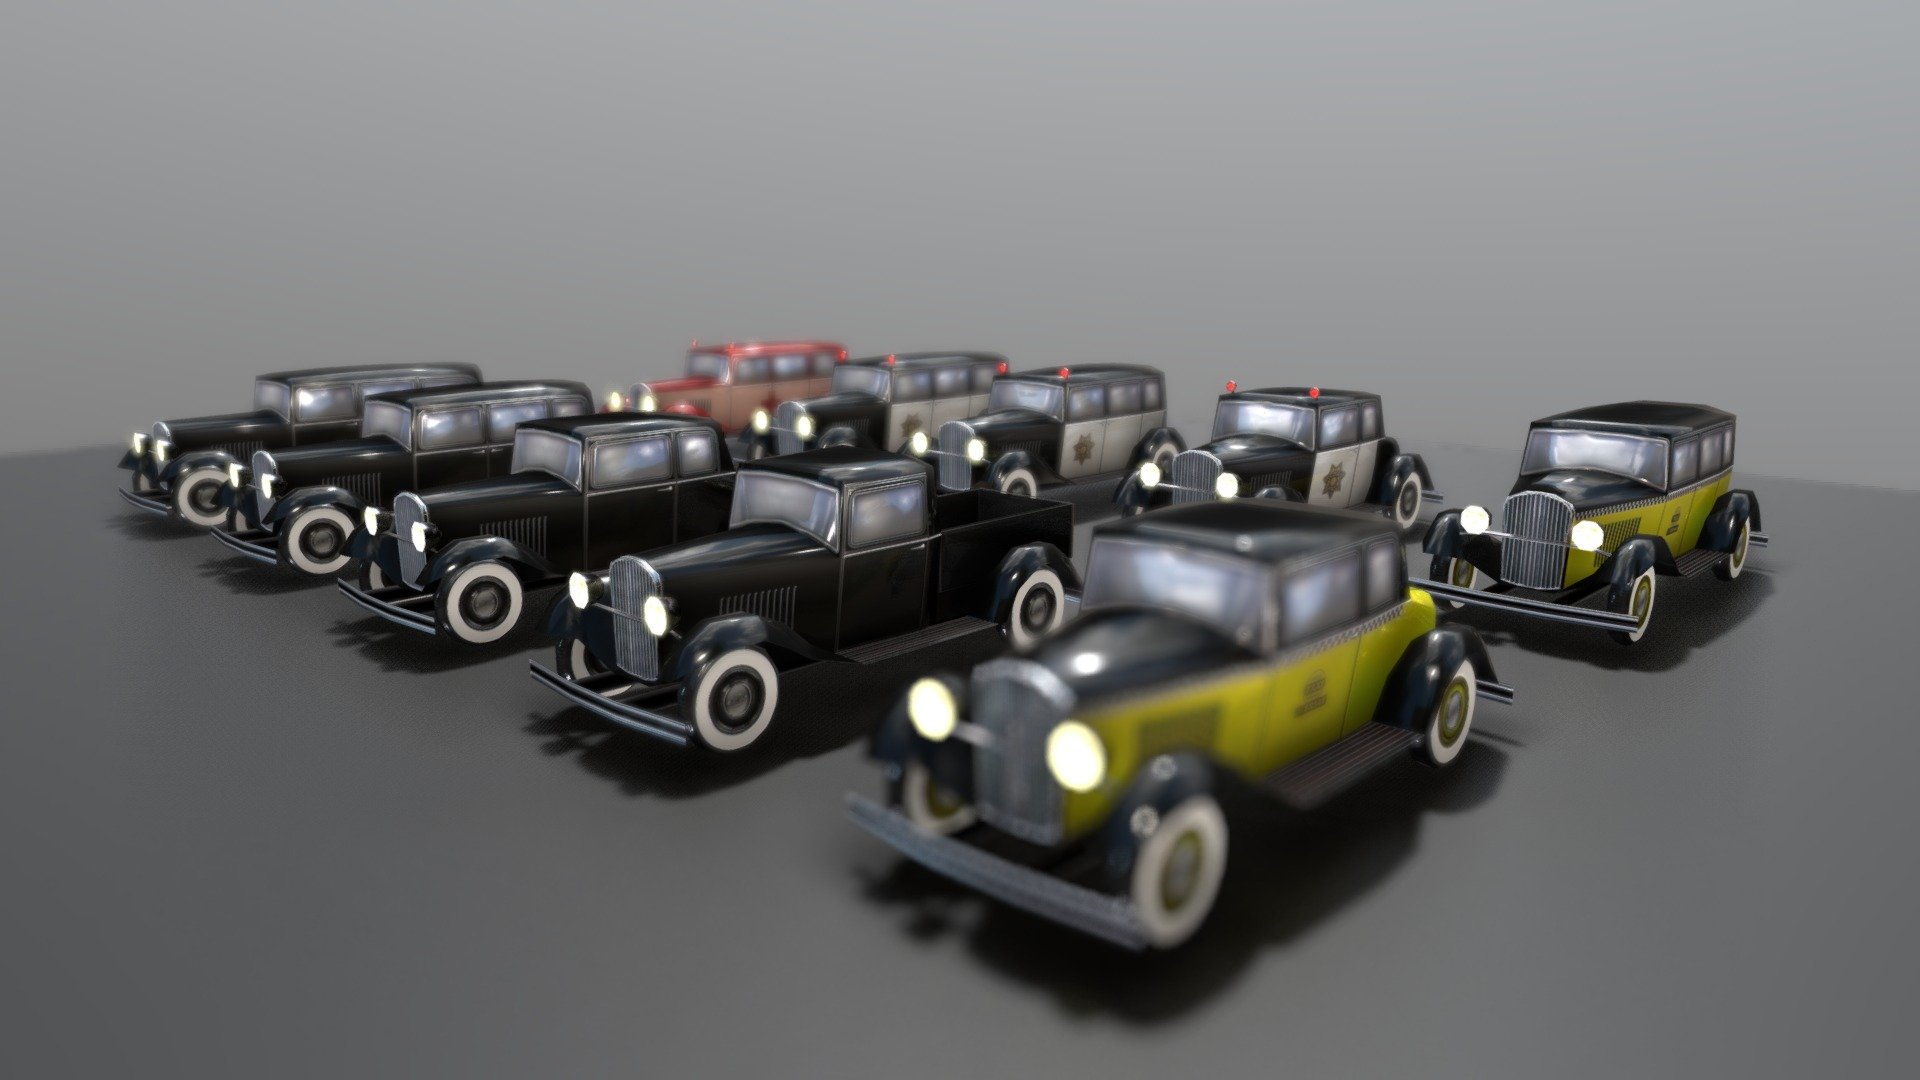 Low poly cars from the 1930' era - with simple textures 3d model